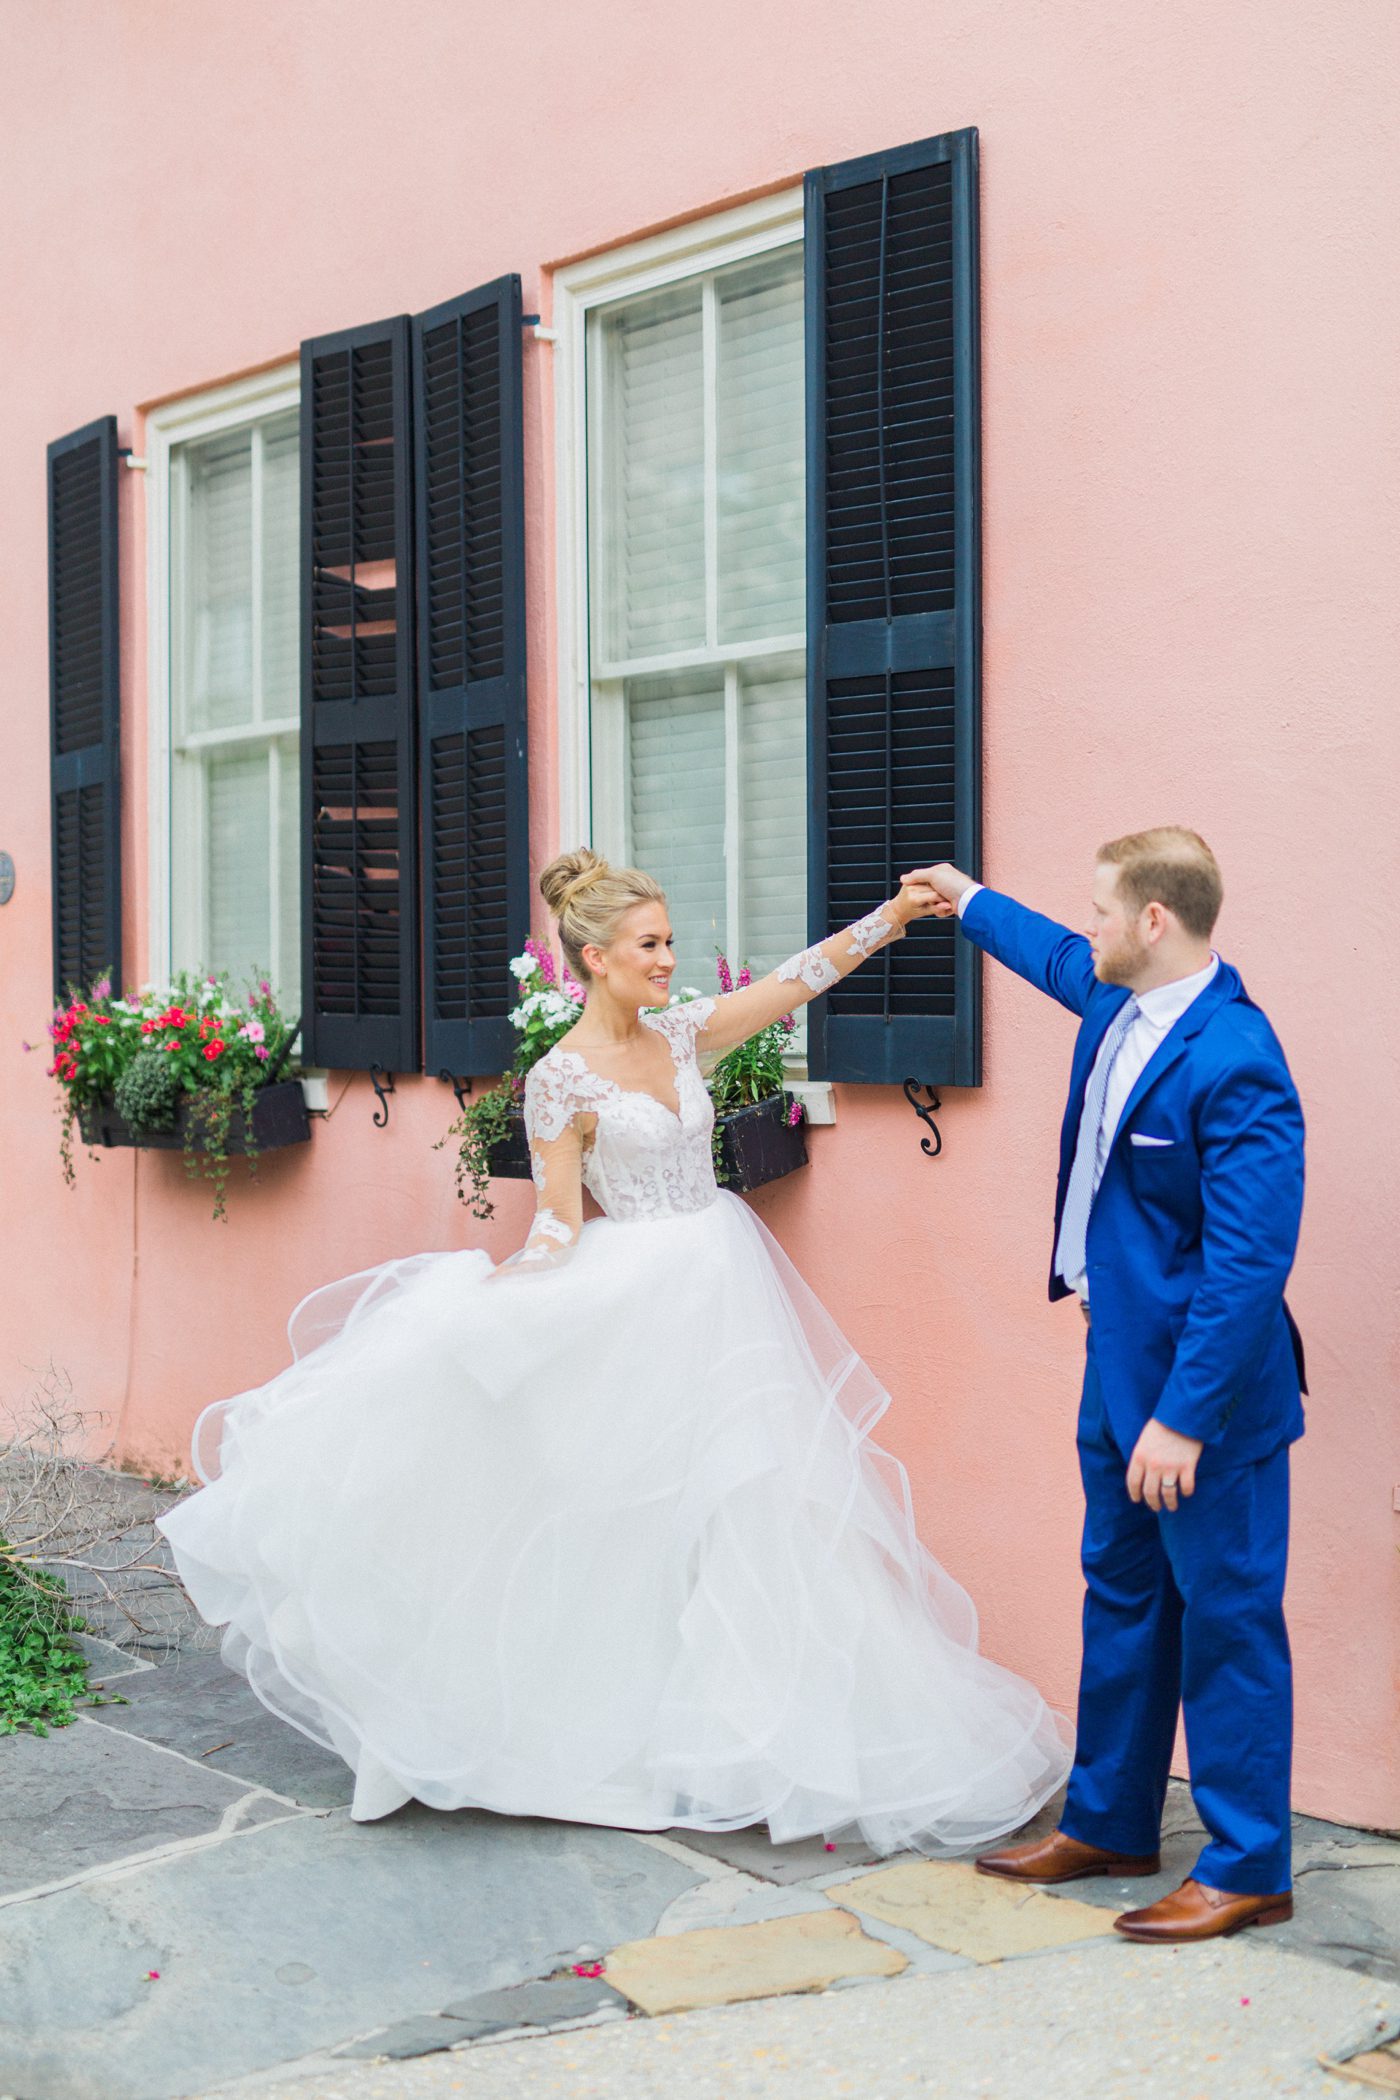 Charleston bride twirling in Hayley Paige gown against a historic pink house 